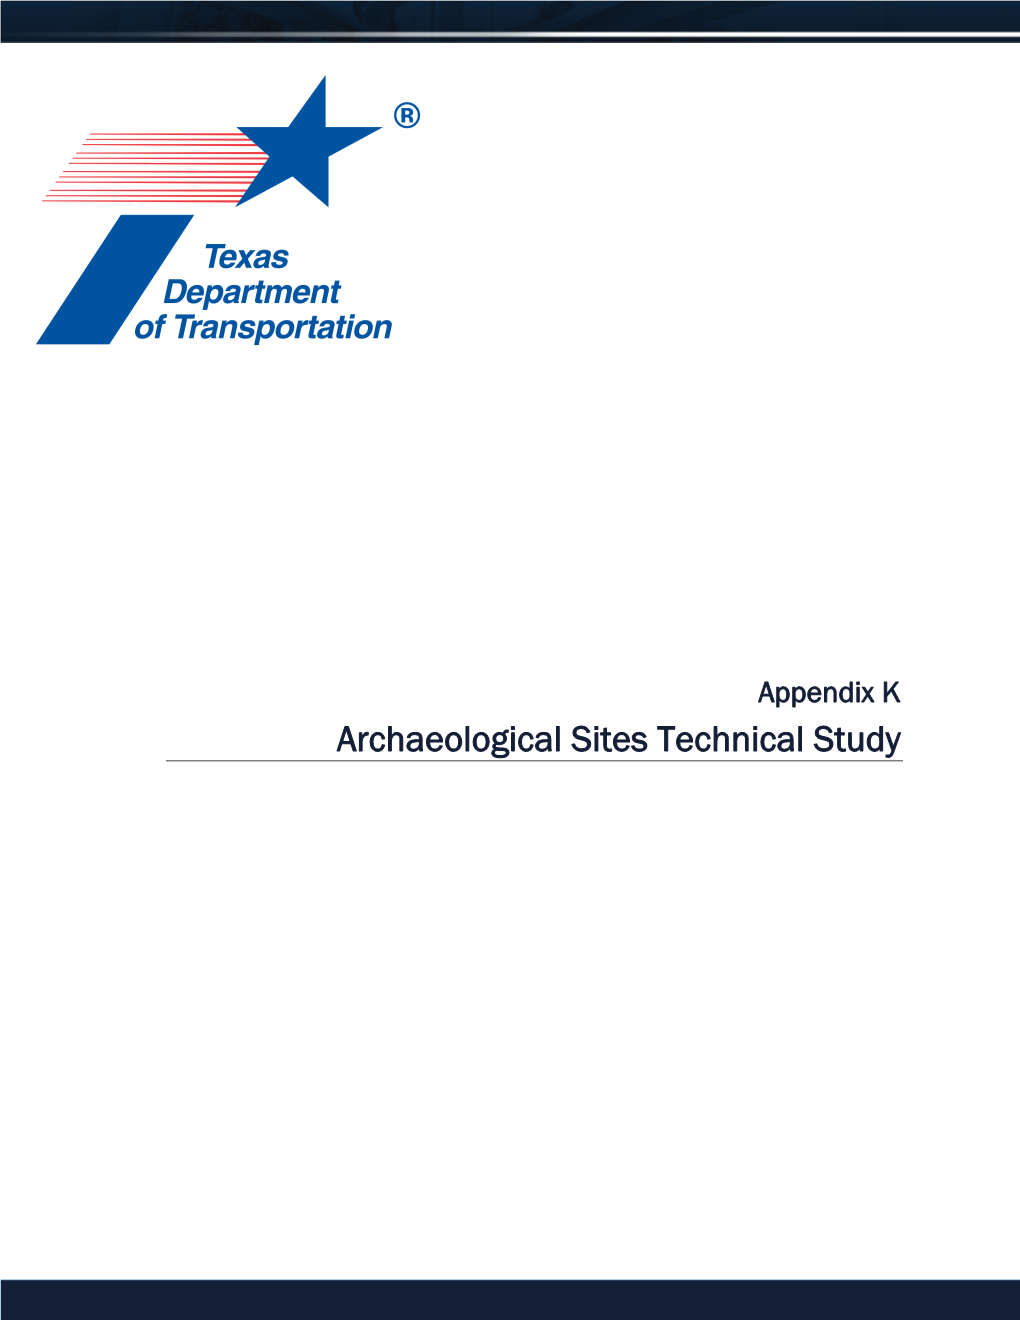 Archaeological Sites Technical Study